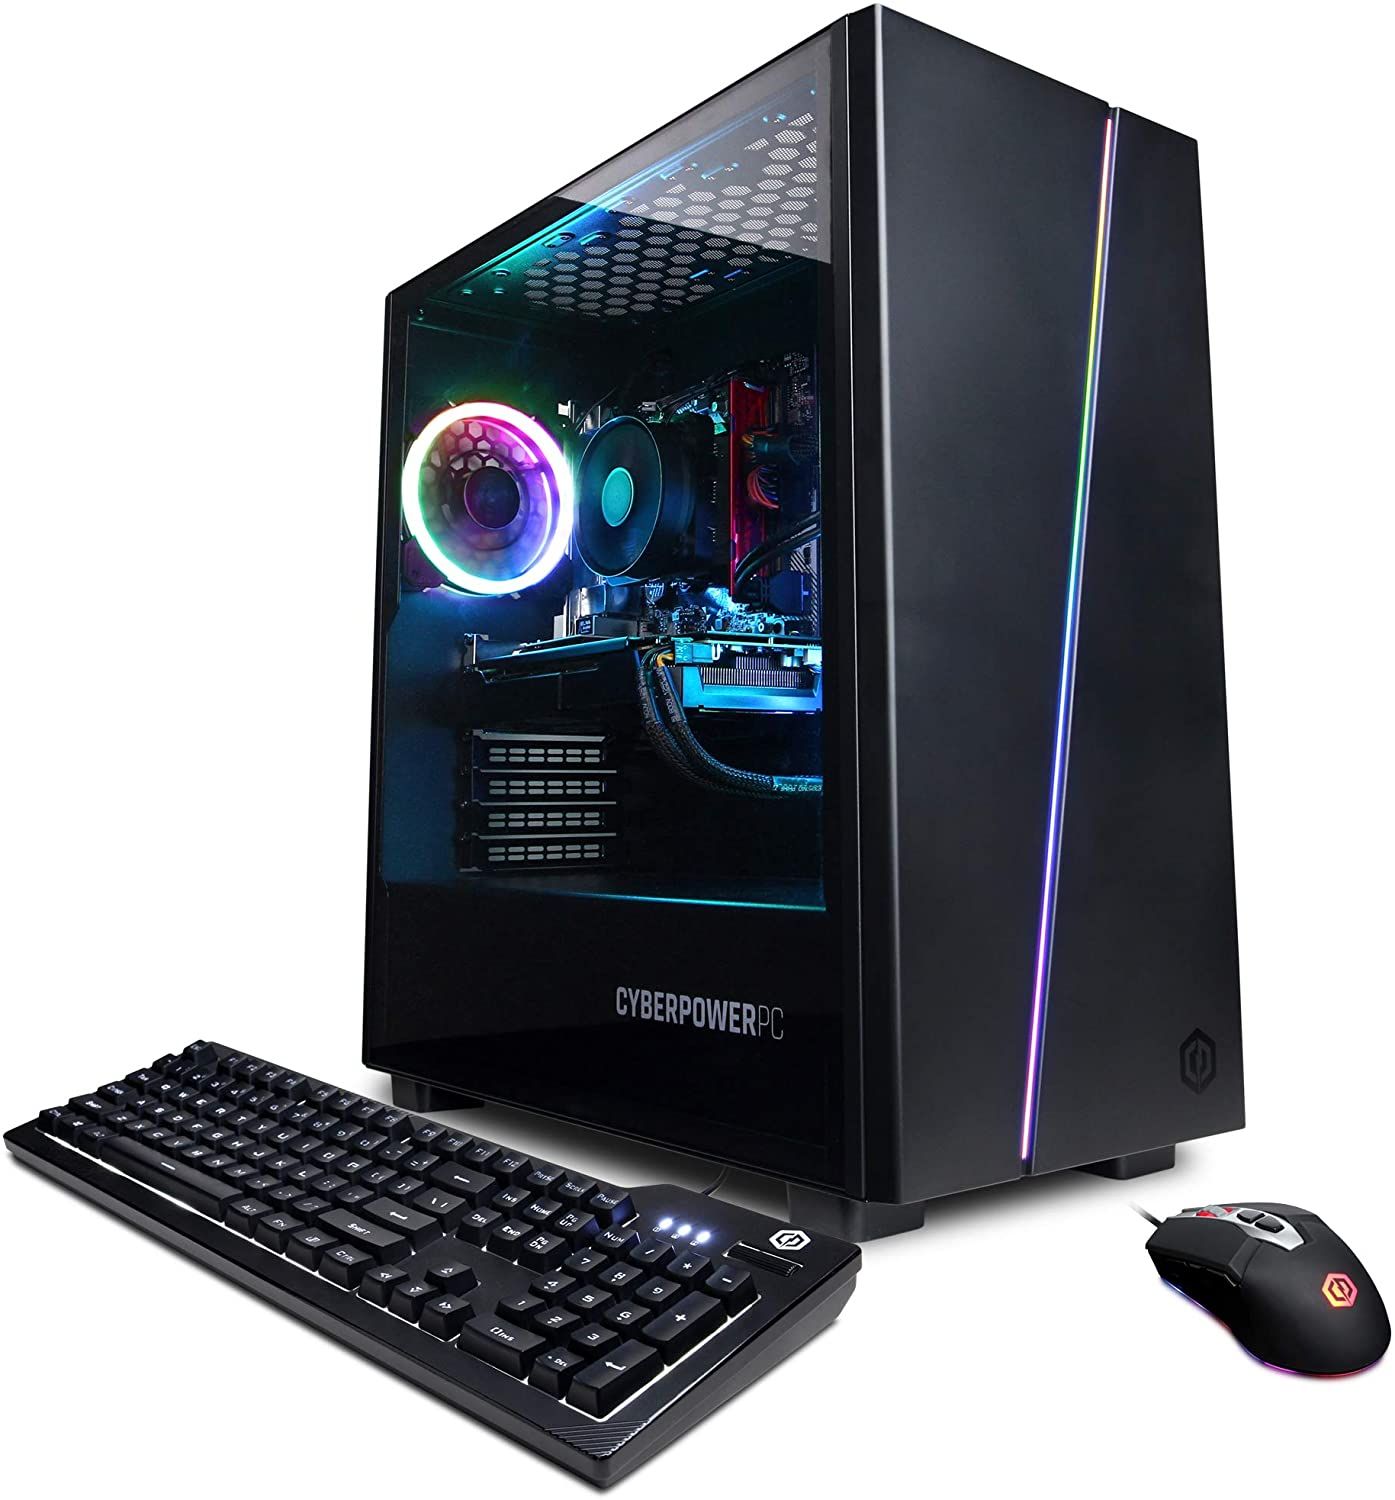 Wooden Best Prebuilt Pc On Amazon for Small Room